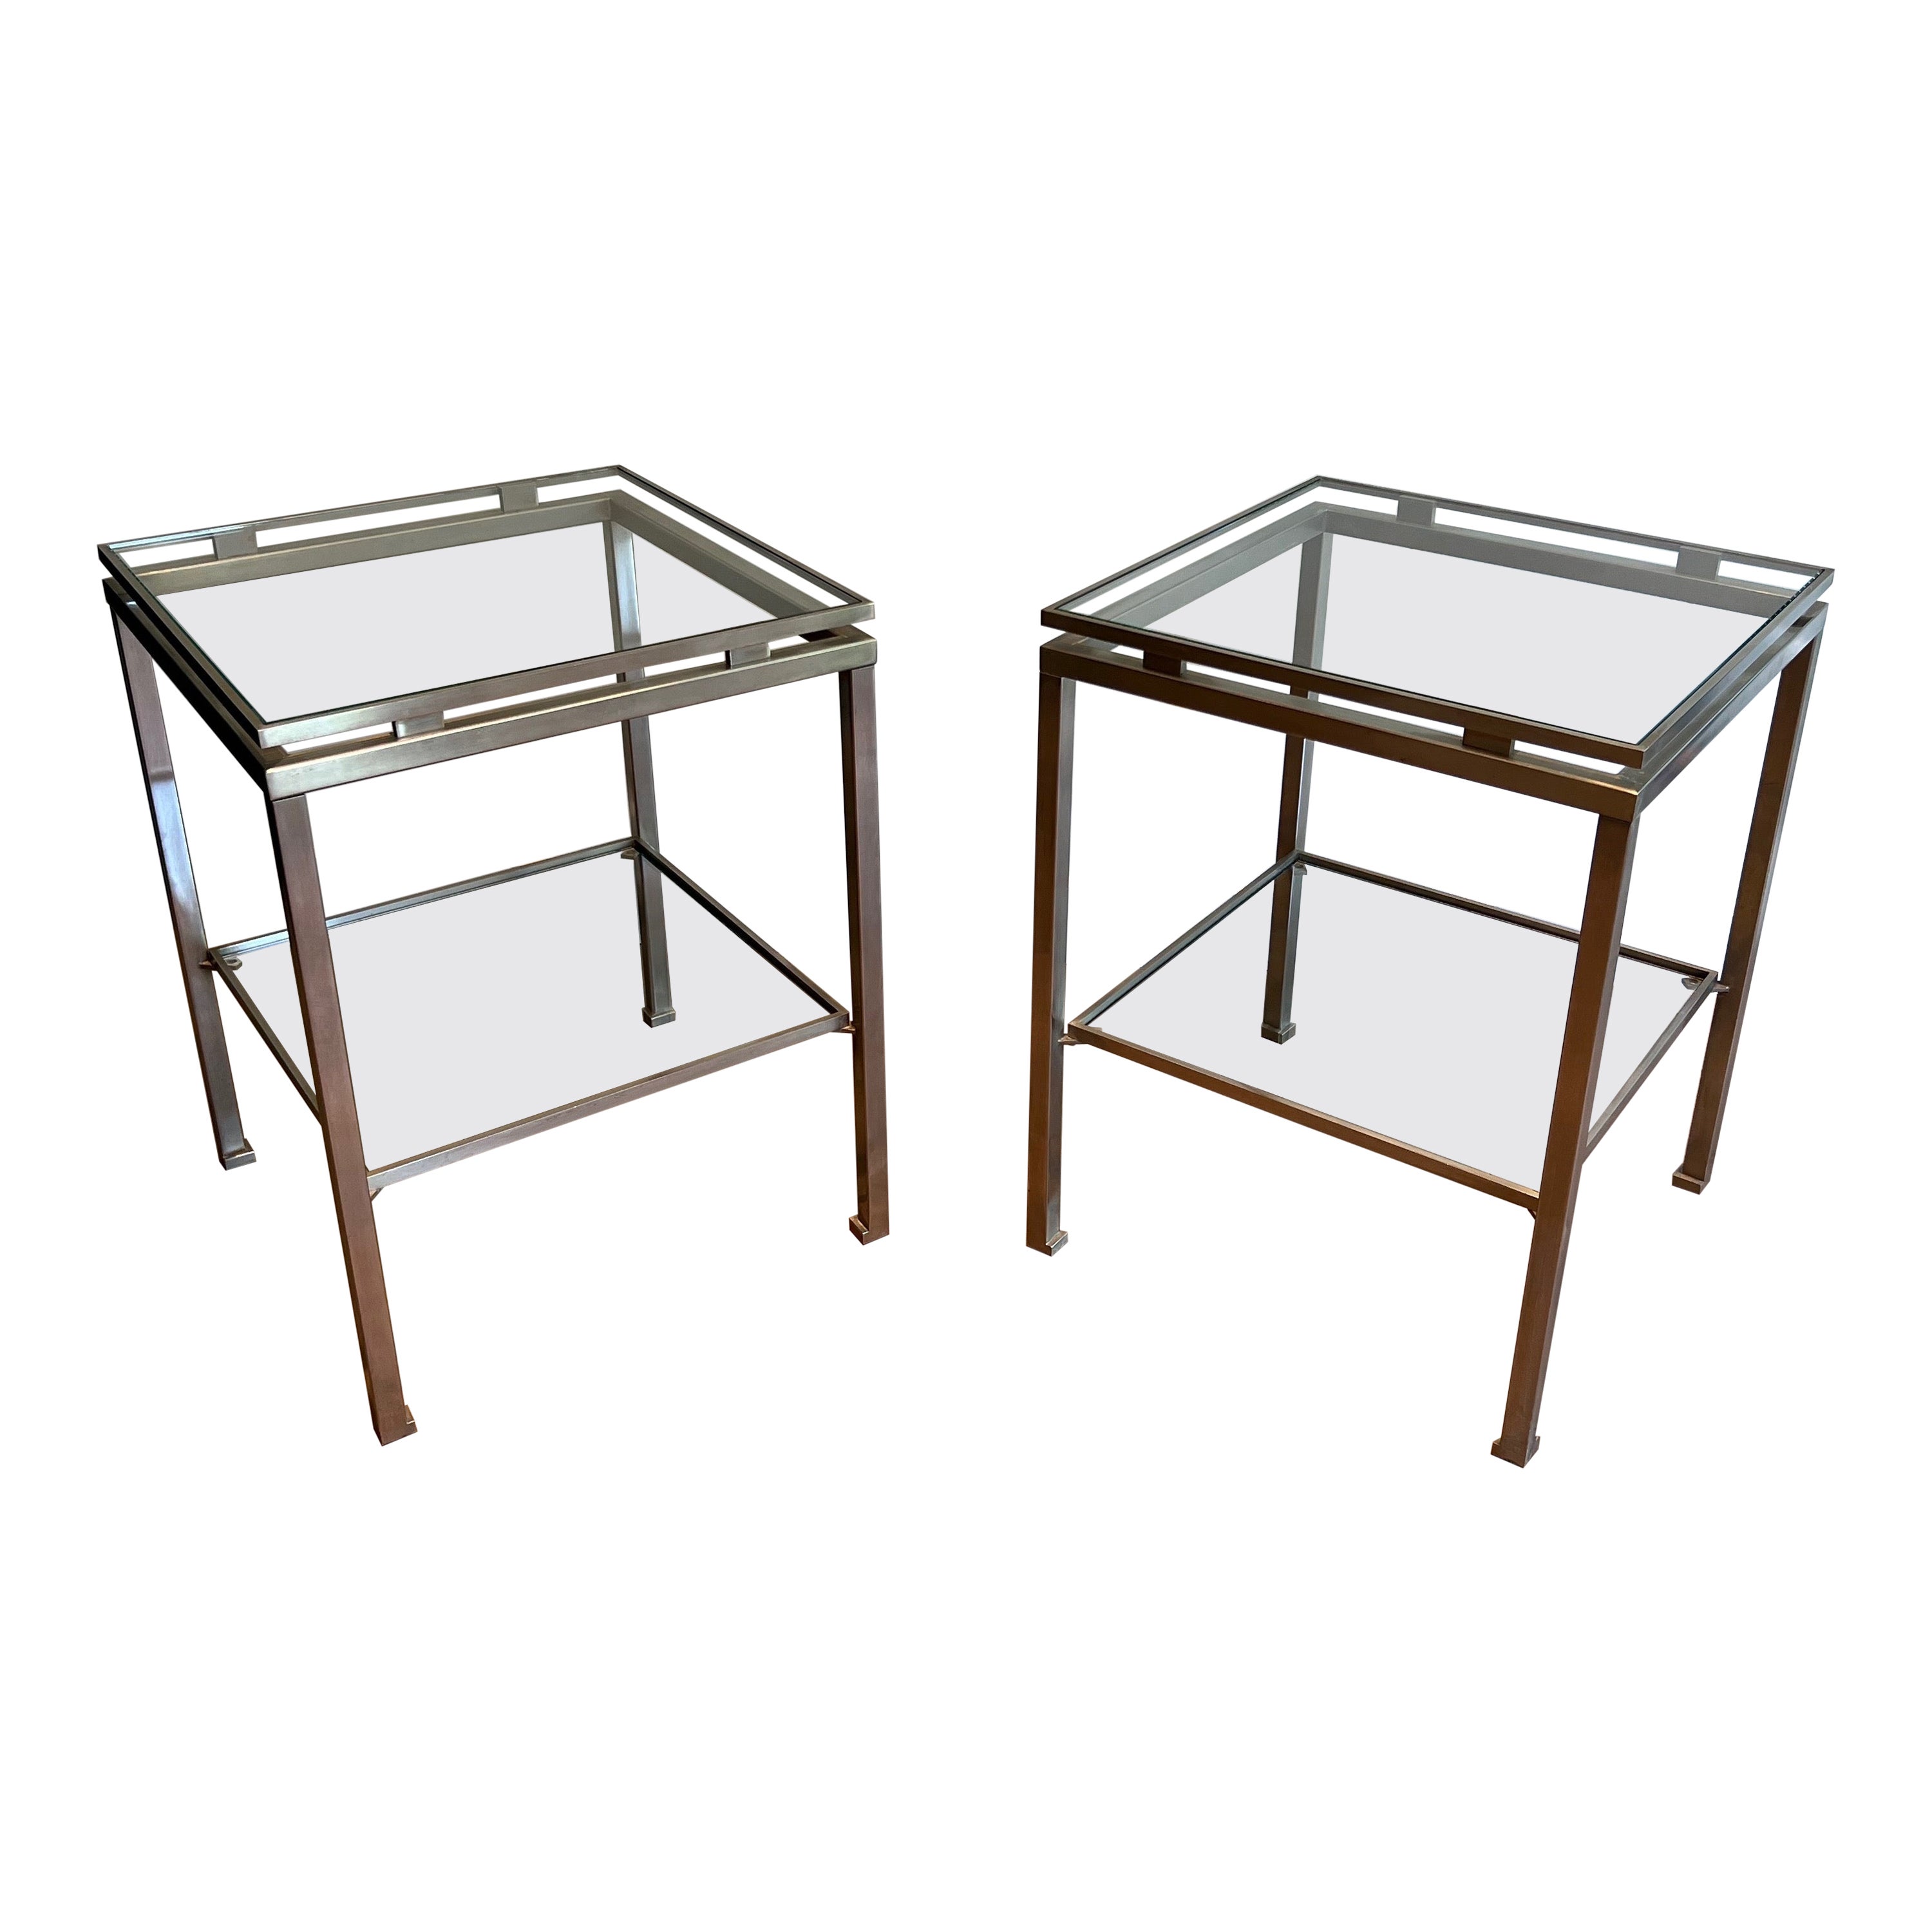 Pair of brushed steel side tables by Guy Lefèvre for Maison Jansen